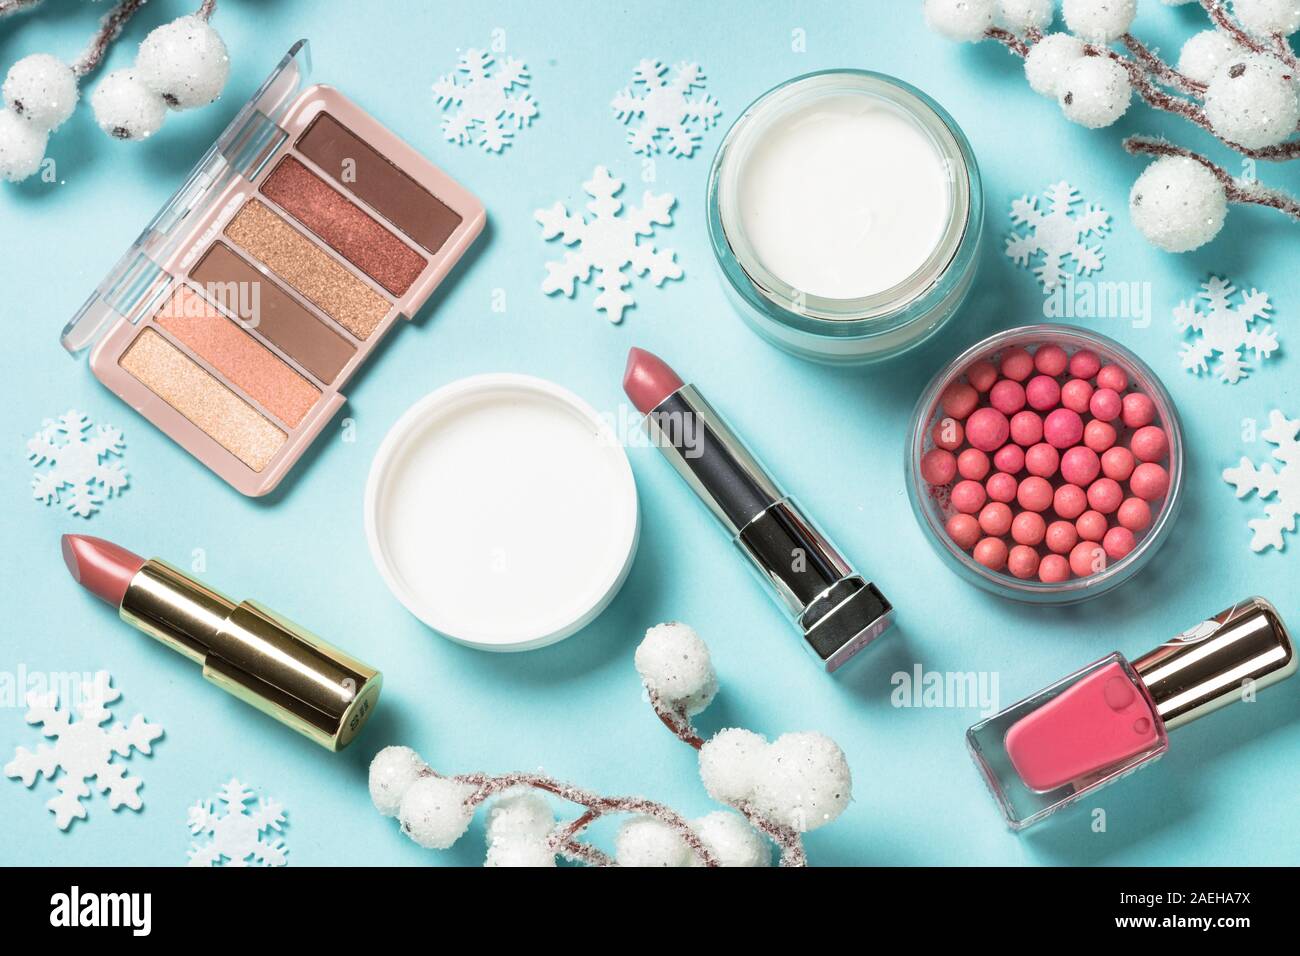 Makeup products, skincare product with christmas decorations. Stock Photo